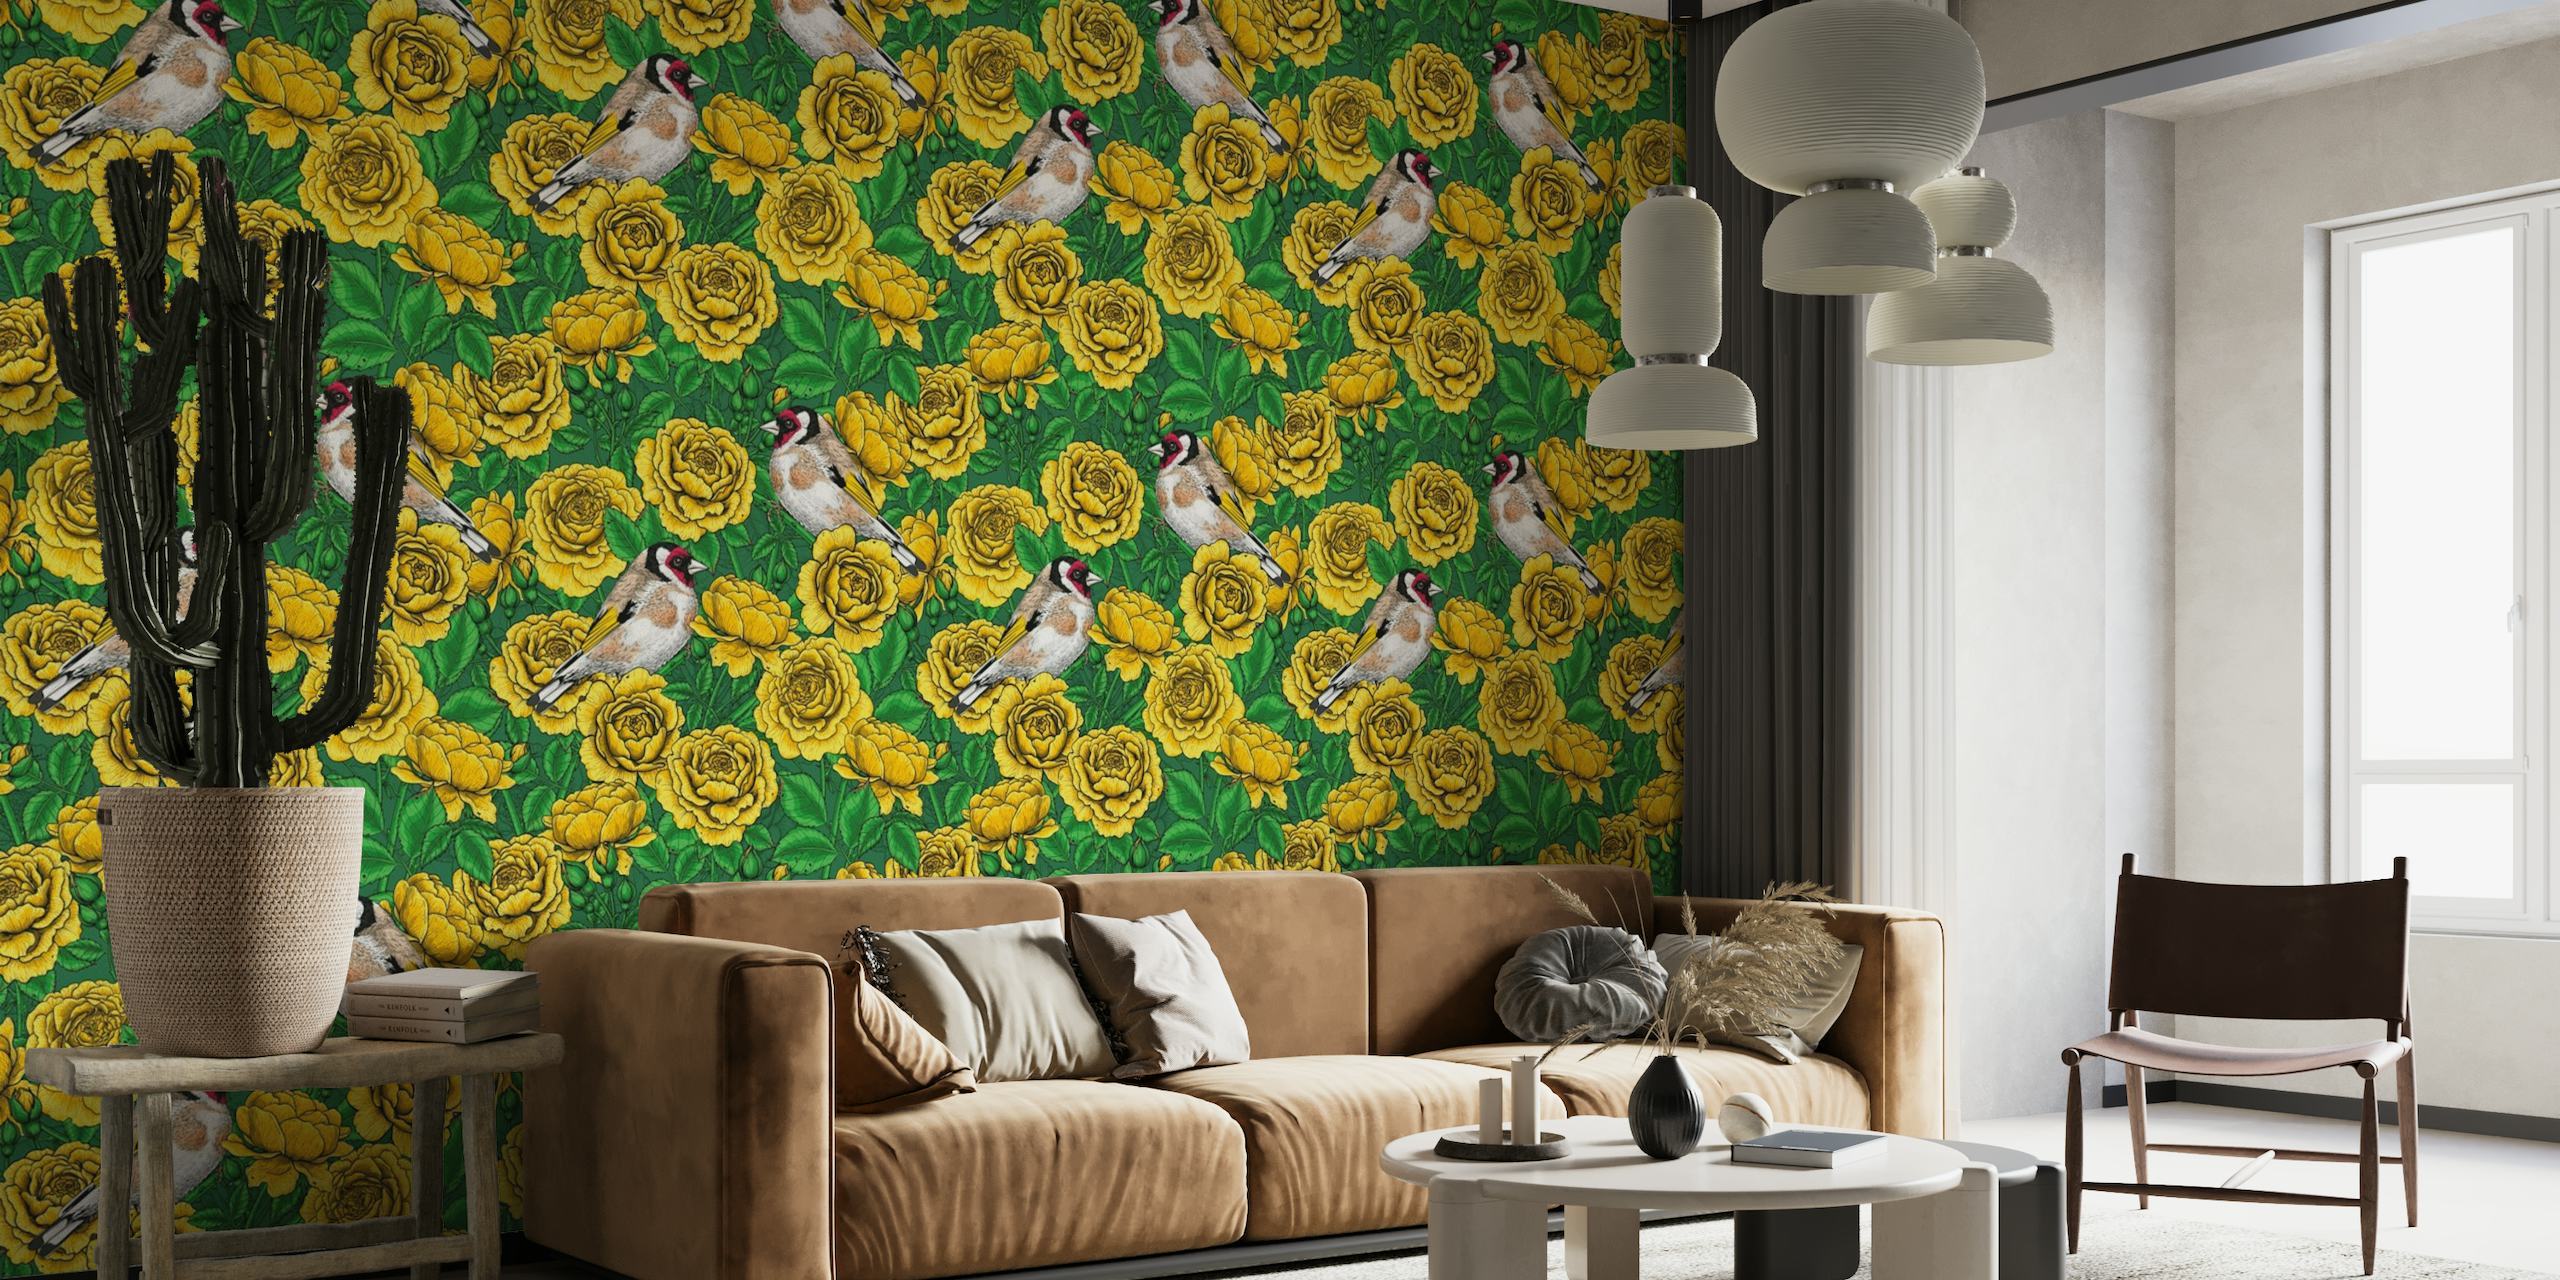 Wall mural with yellow roses and goldfinch birds on a green background